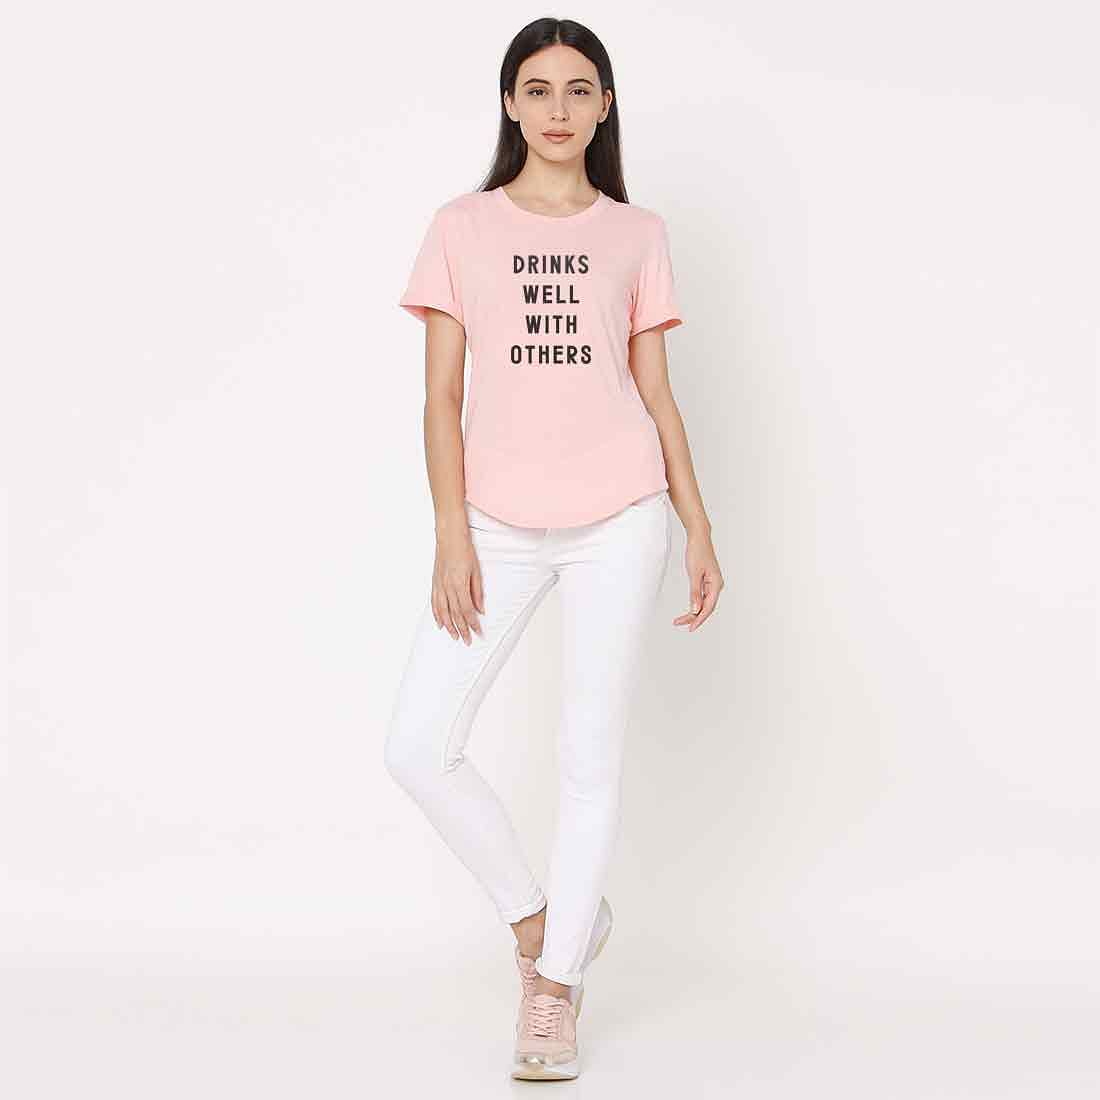 Funny Tshirt For Women Booze Tees  - Drinks Well with Others Nutcase